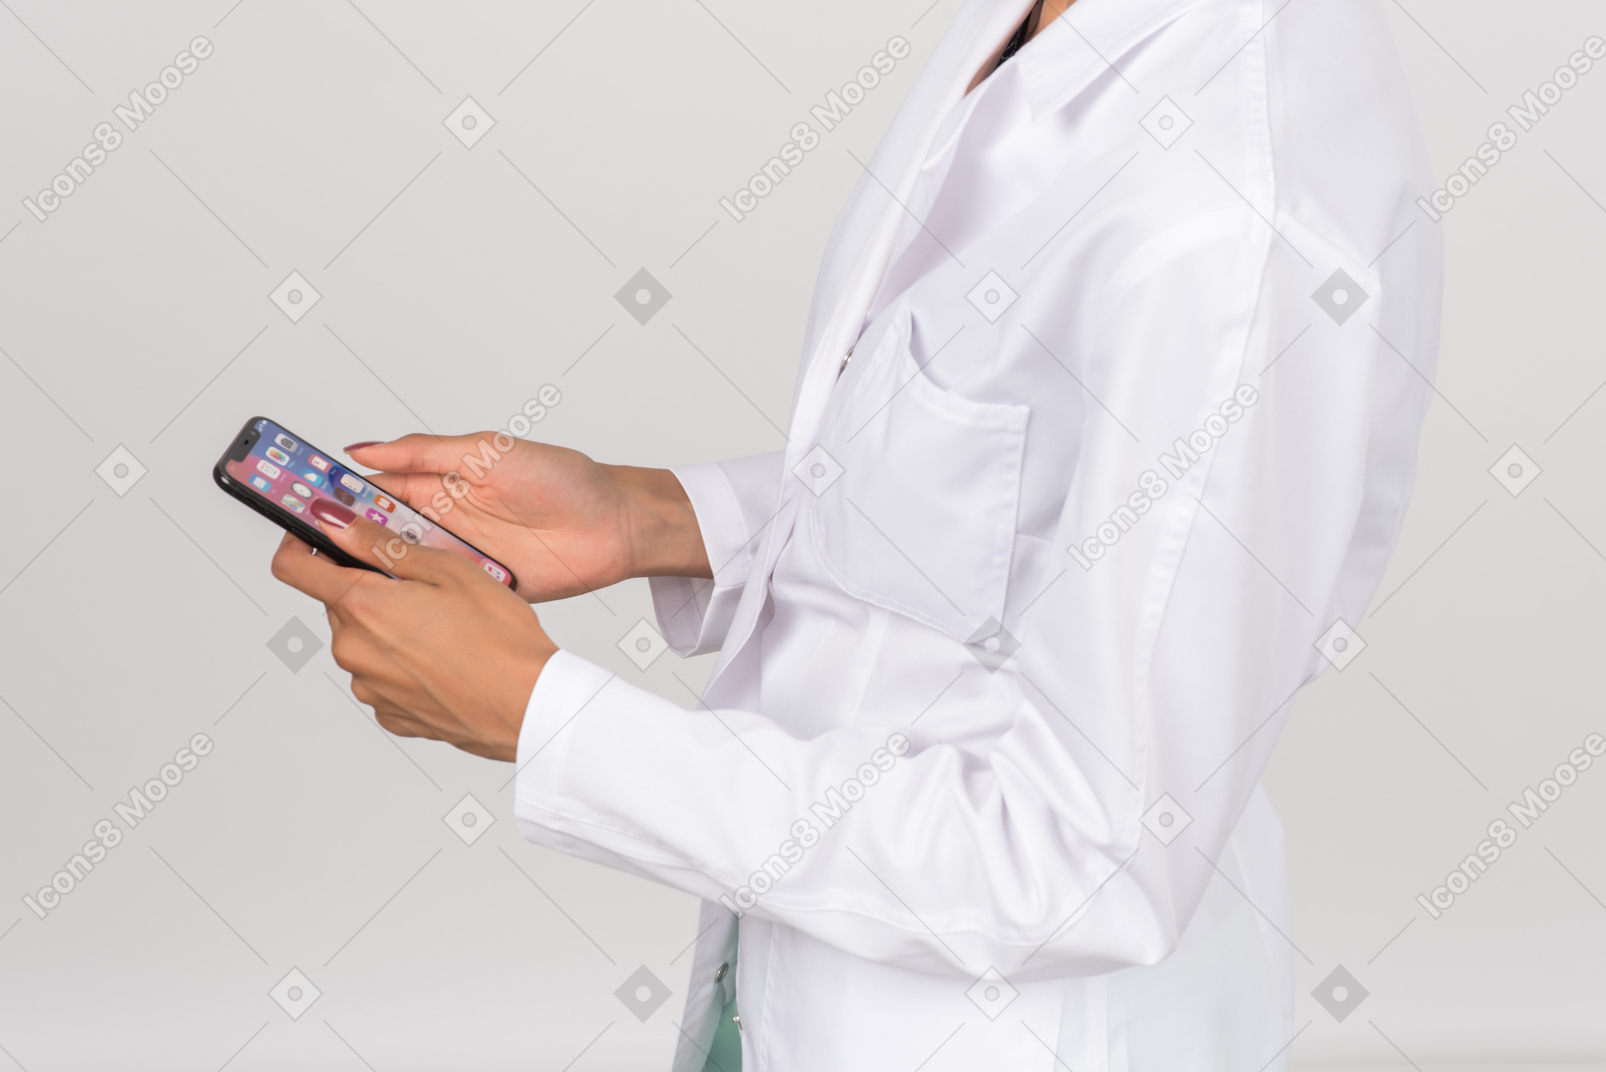 Female doctor holding a smartphone